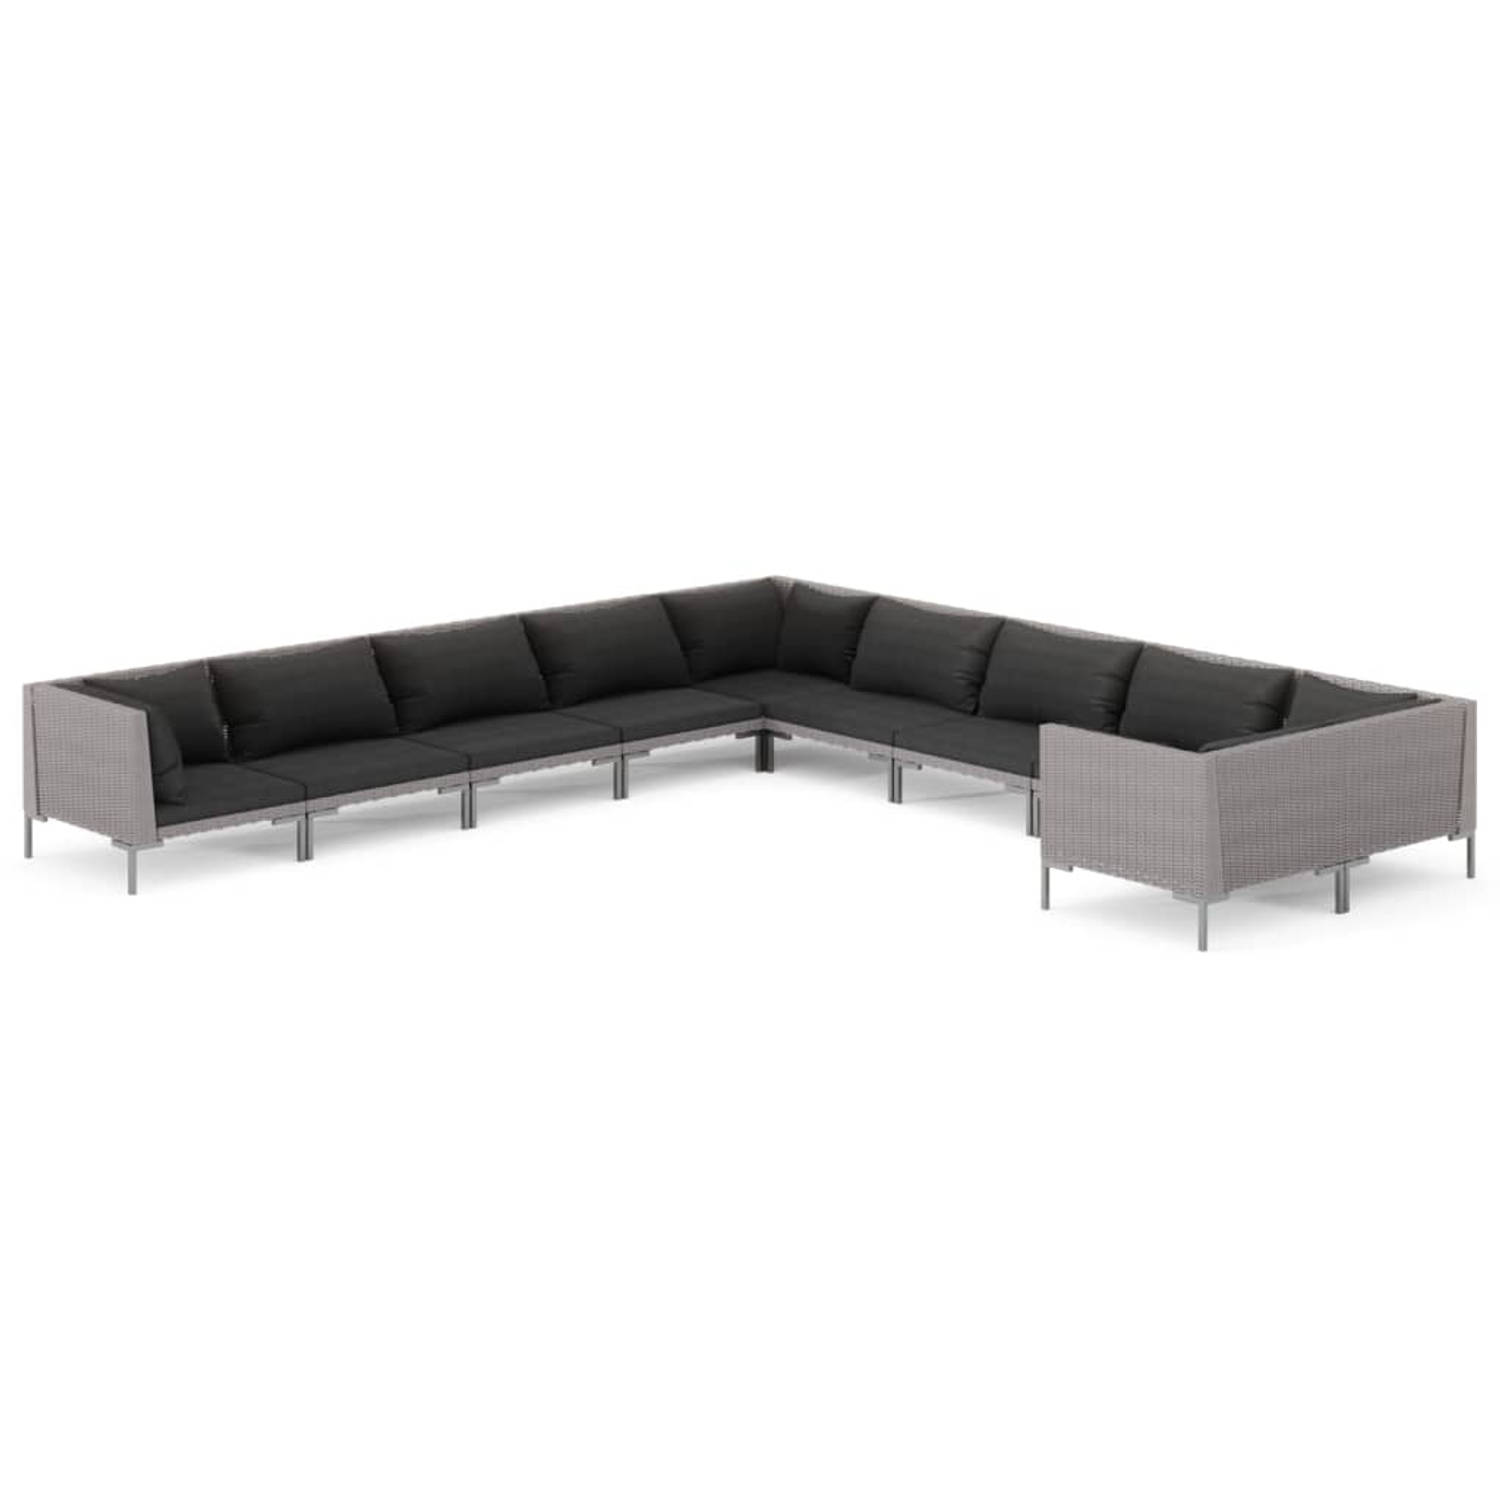 The Living Store 10-delige Loungeset met kussens poly rattan donkergrijs - Tuinset